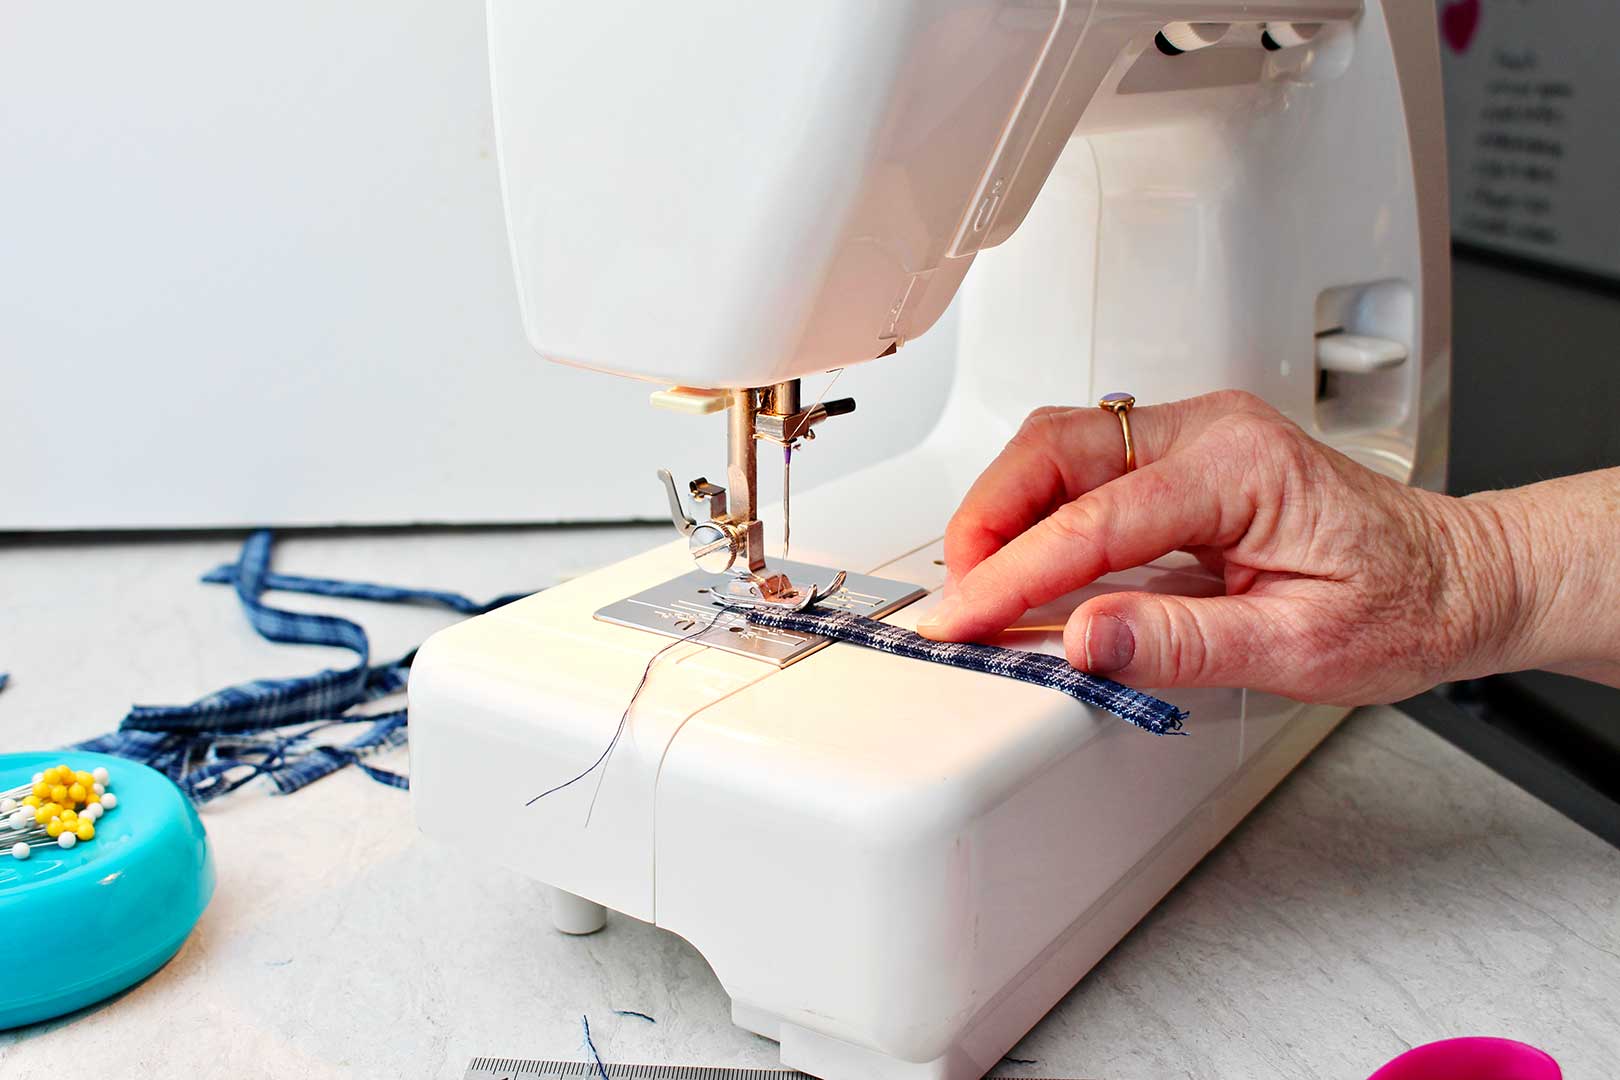 Hand sewing small strip of fabric on sewing machine.